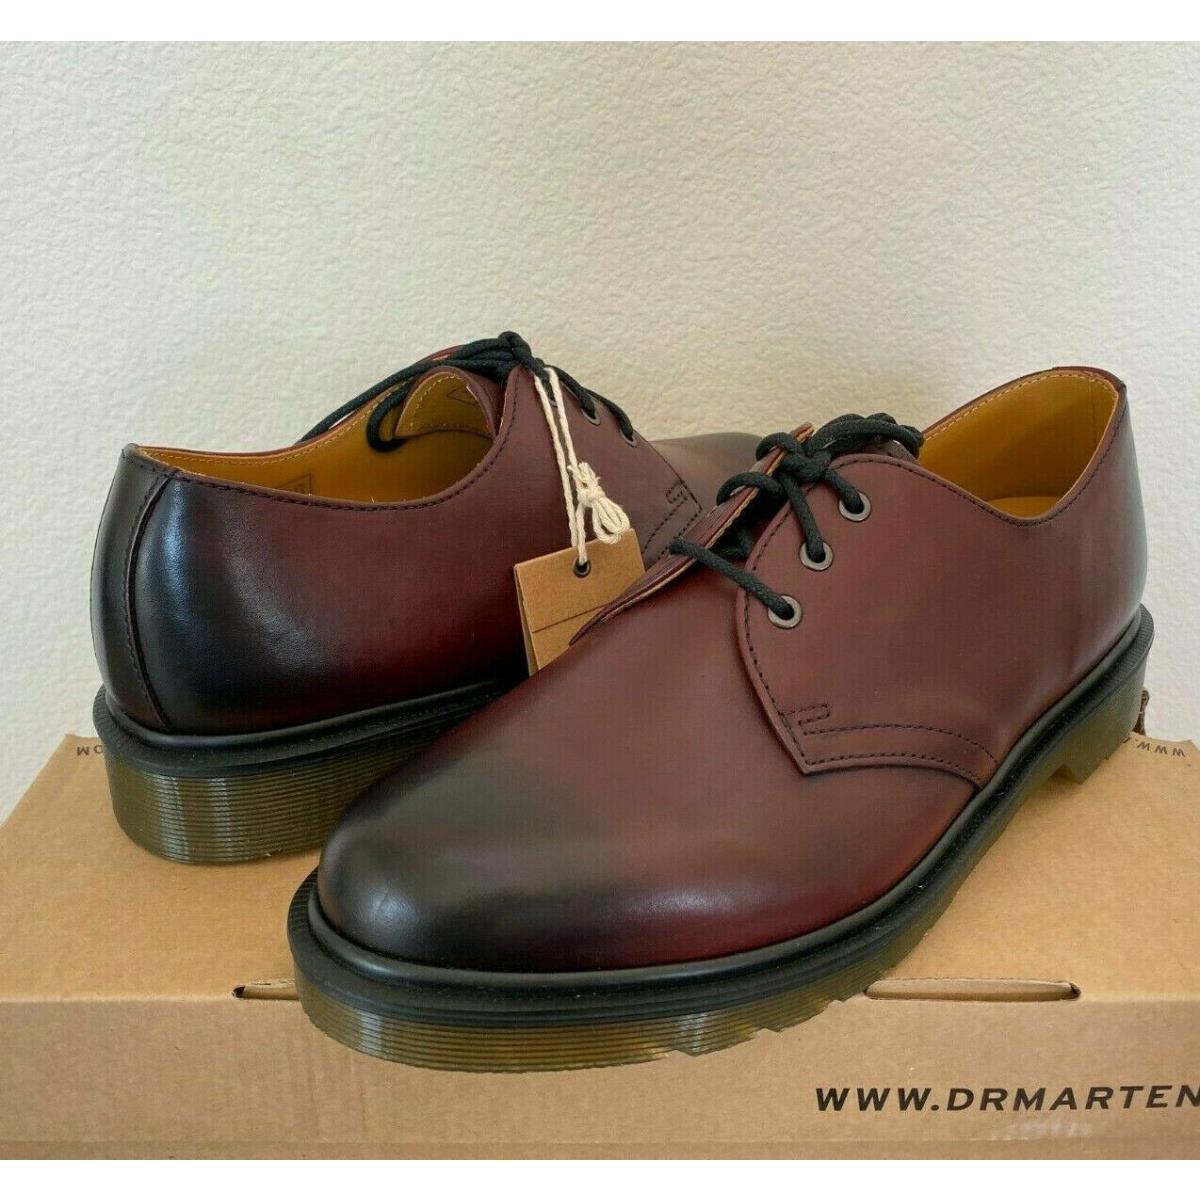 Dr. Martens 1461 3 Eye Oxfords Women`s Shoes Cherry Red Antique Temperley